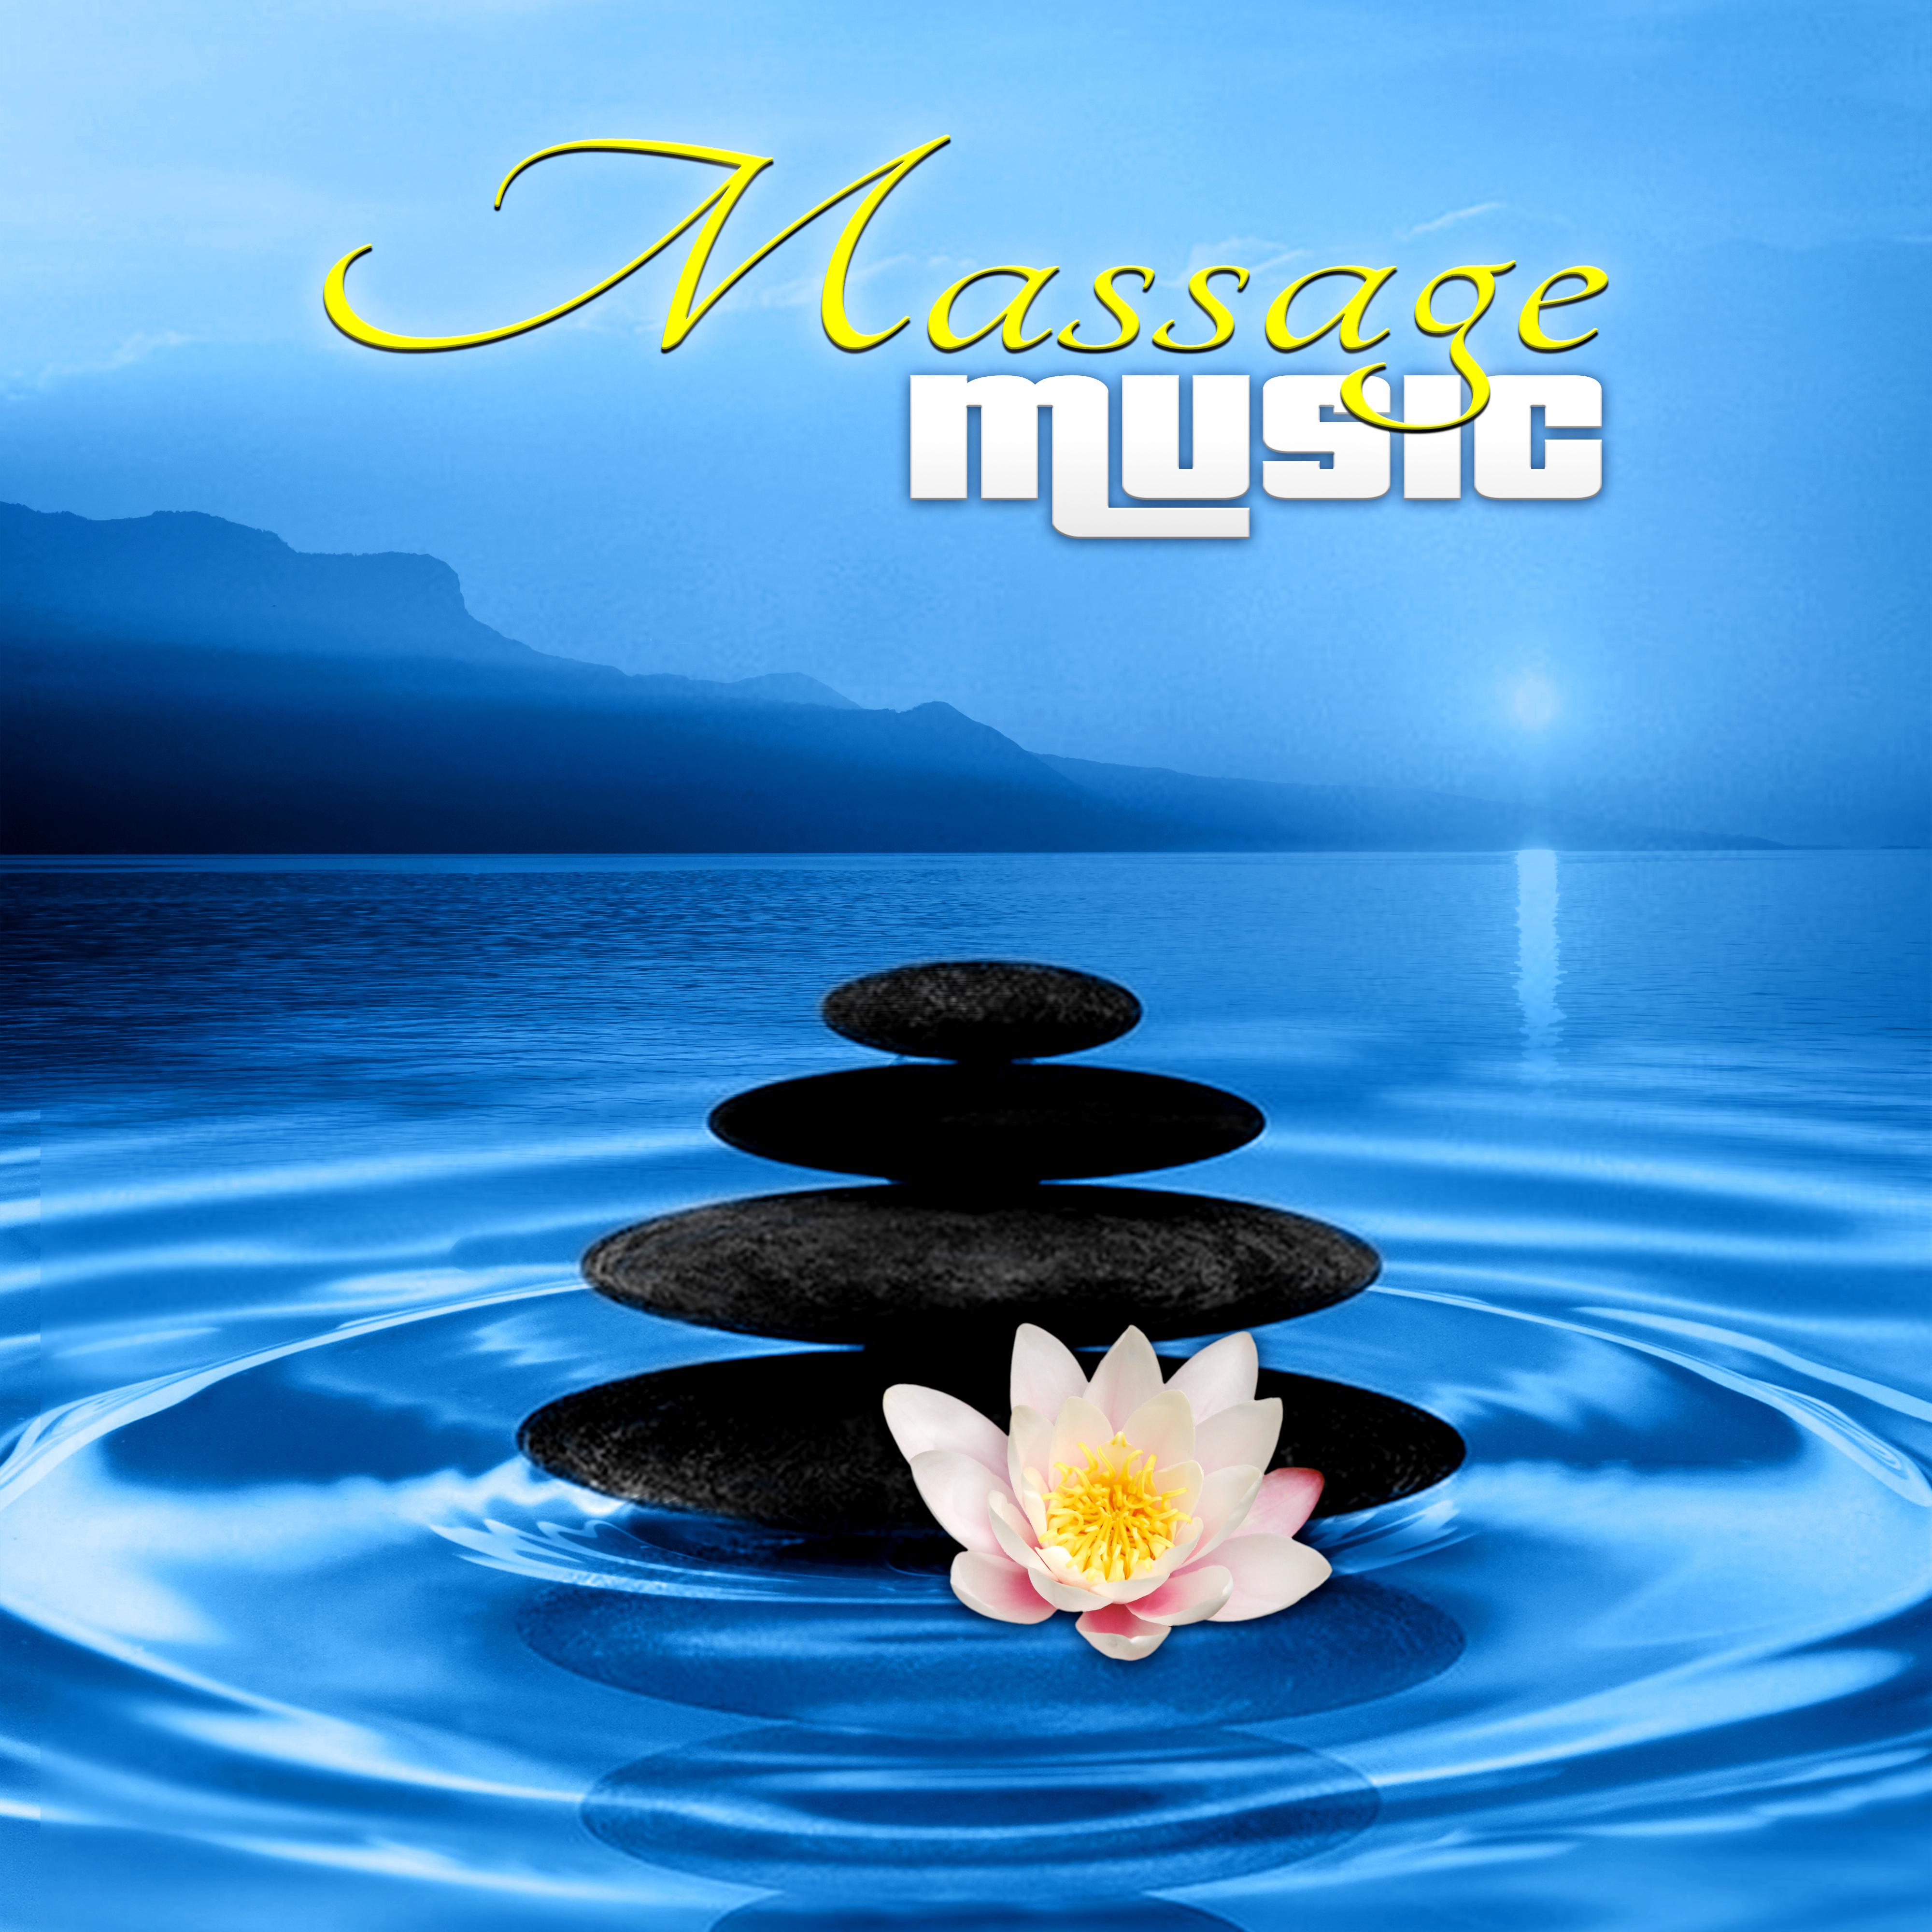 Massage Music - Touch My Body, Serenity Spa, Reiki Healing, Gentle Touch, Wellness, Piano, Flute, Sounds of Nature & Ocean Waves